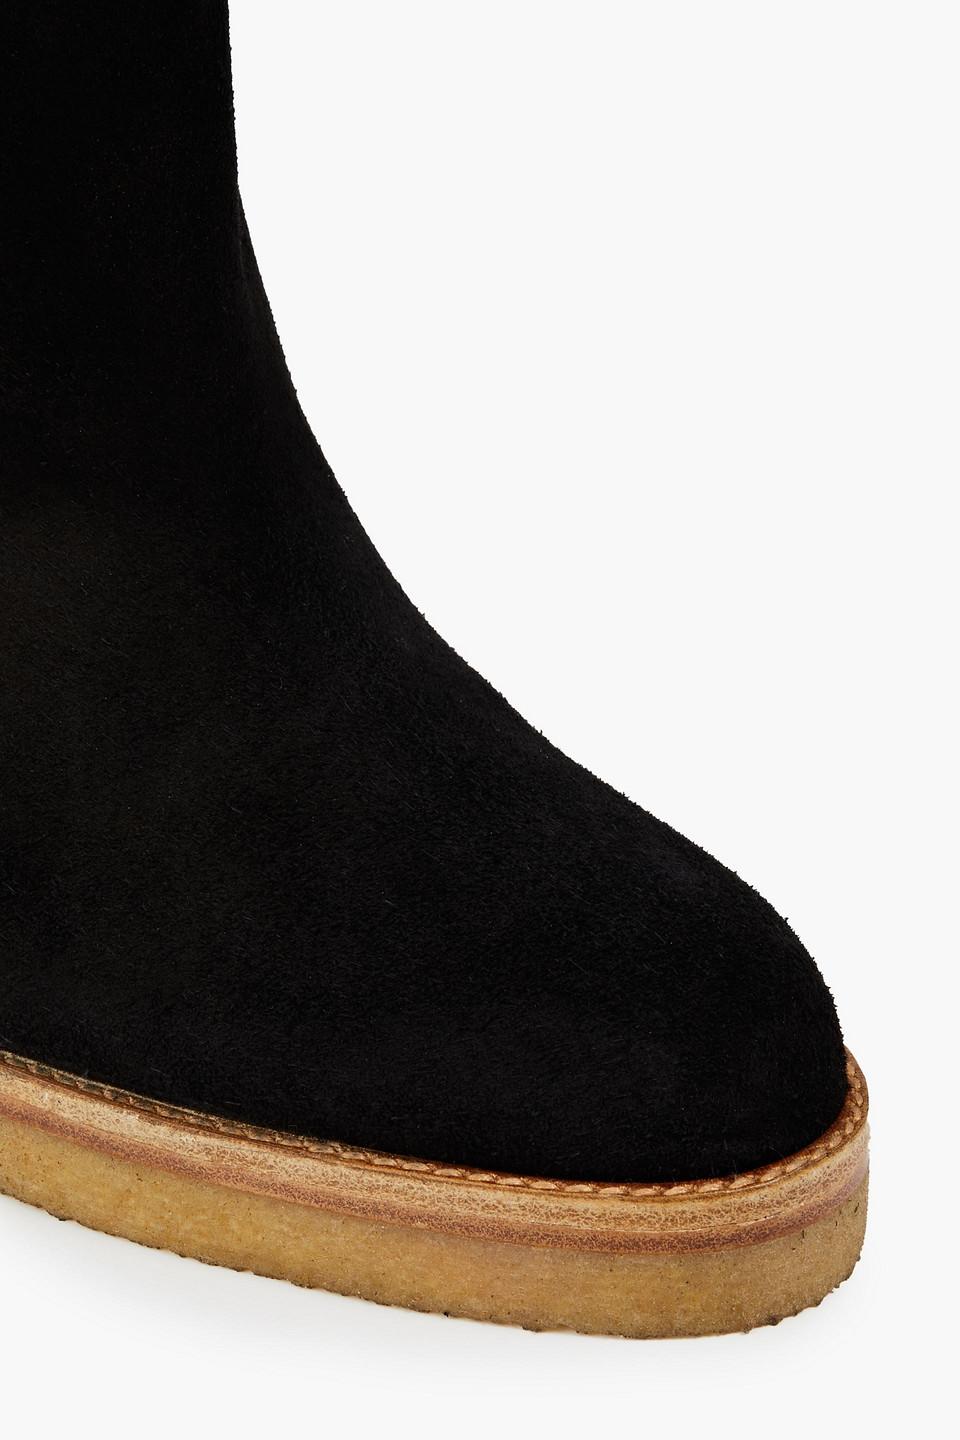 Ba&sh Leather Cassandra Suede Wedge Boots in Black | Lyst